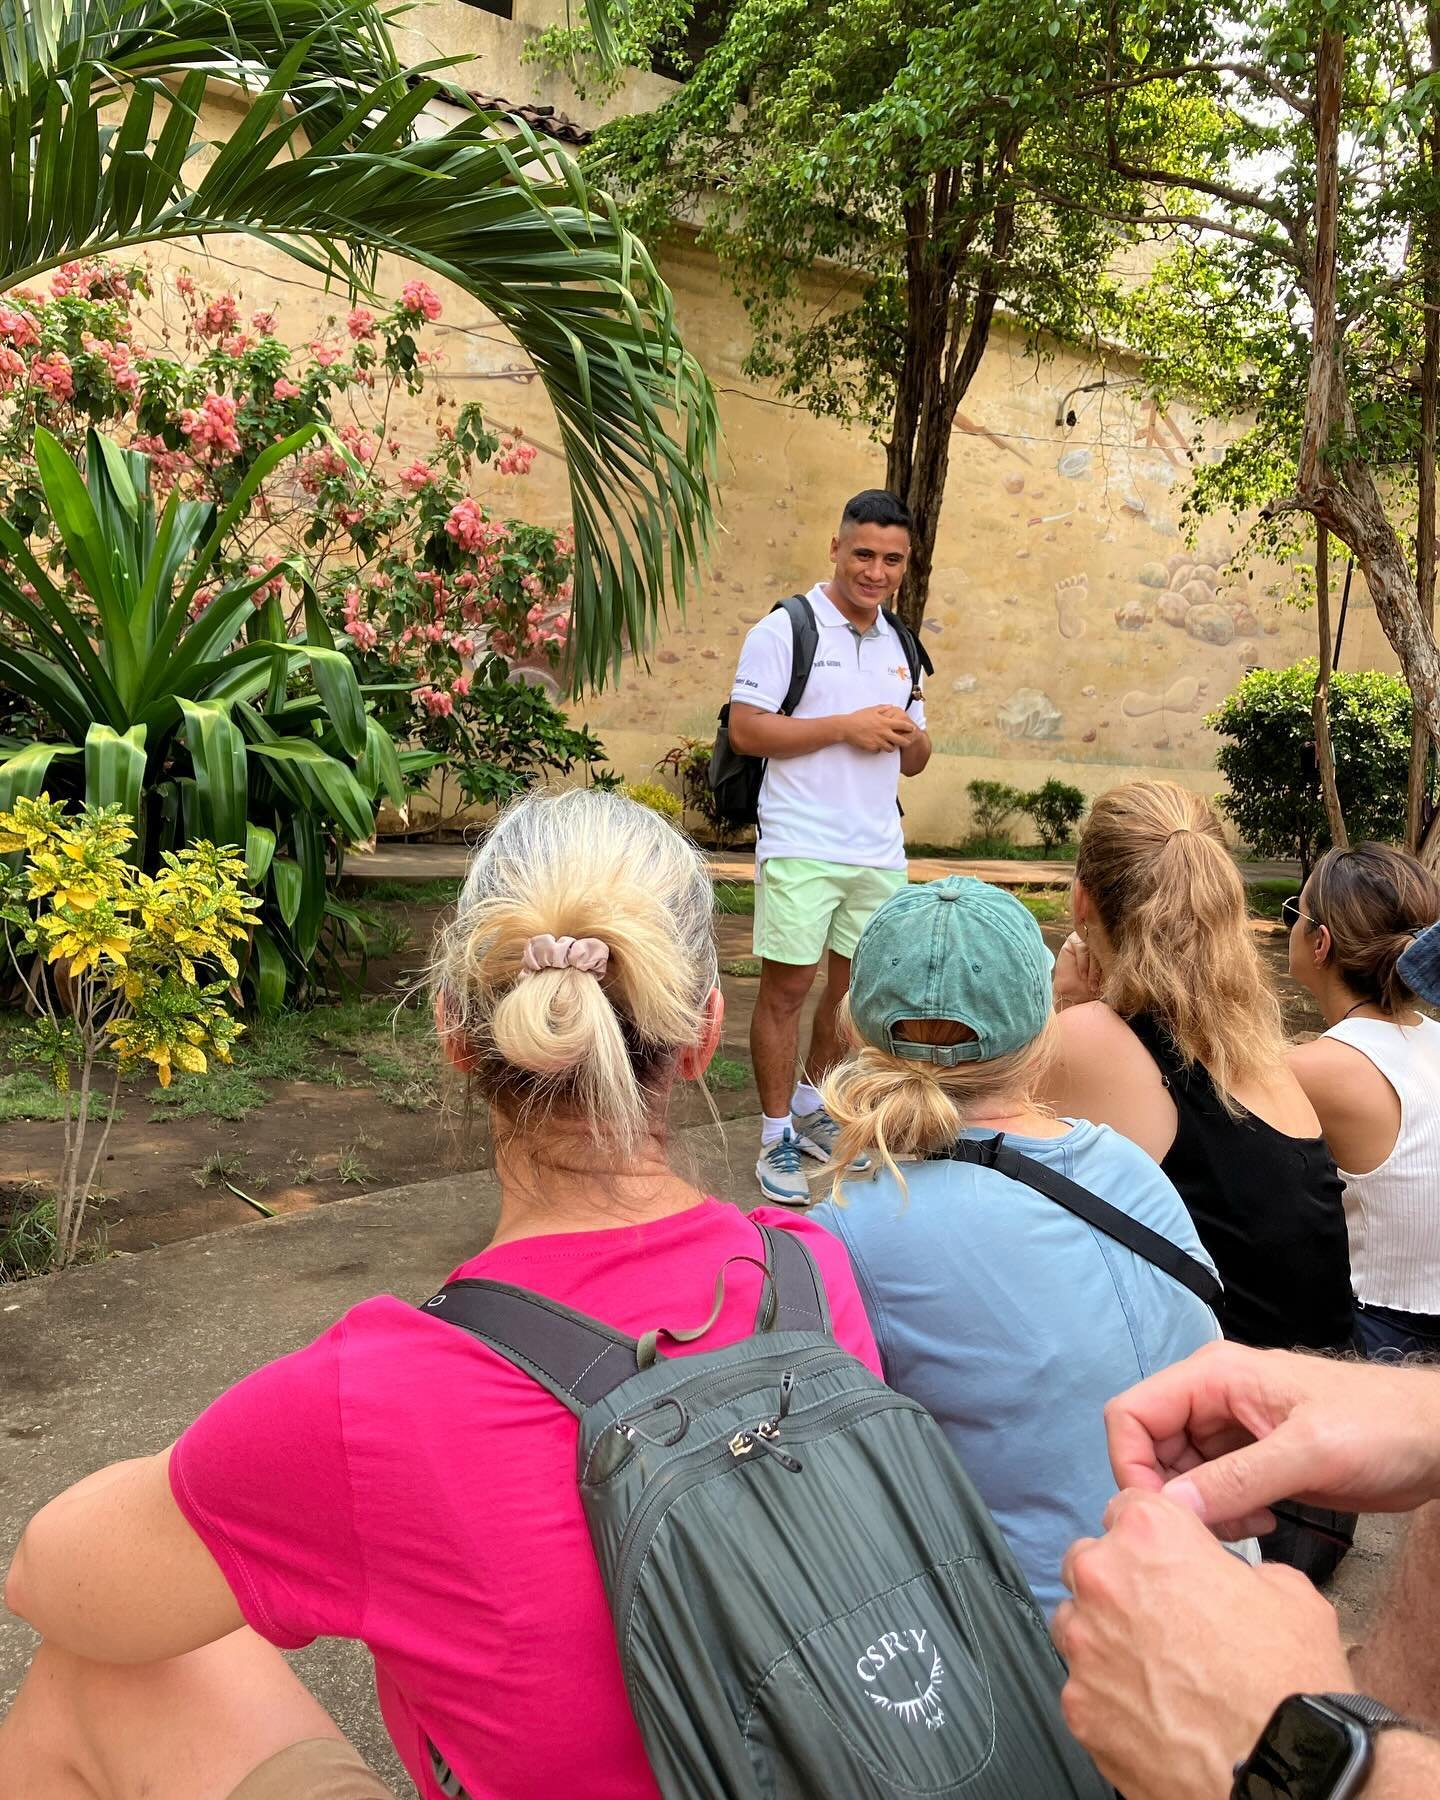 We did a walking tour of Le&oacute;n. 

What a fascinating insight into Nicaragua&rsquo;s history and politic situation. So, so interesting. 

Did you know that in 500 years of history Nicaragua has had just 60 years of peace with no fighting. Just i